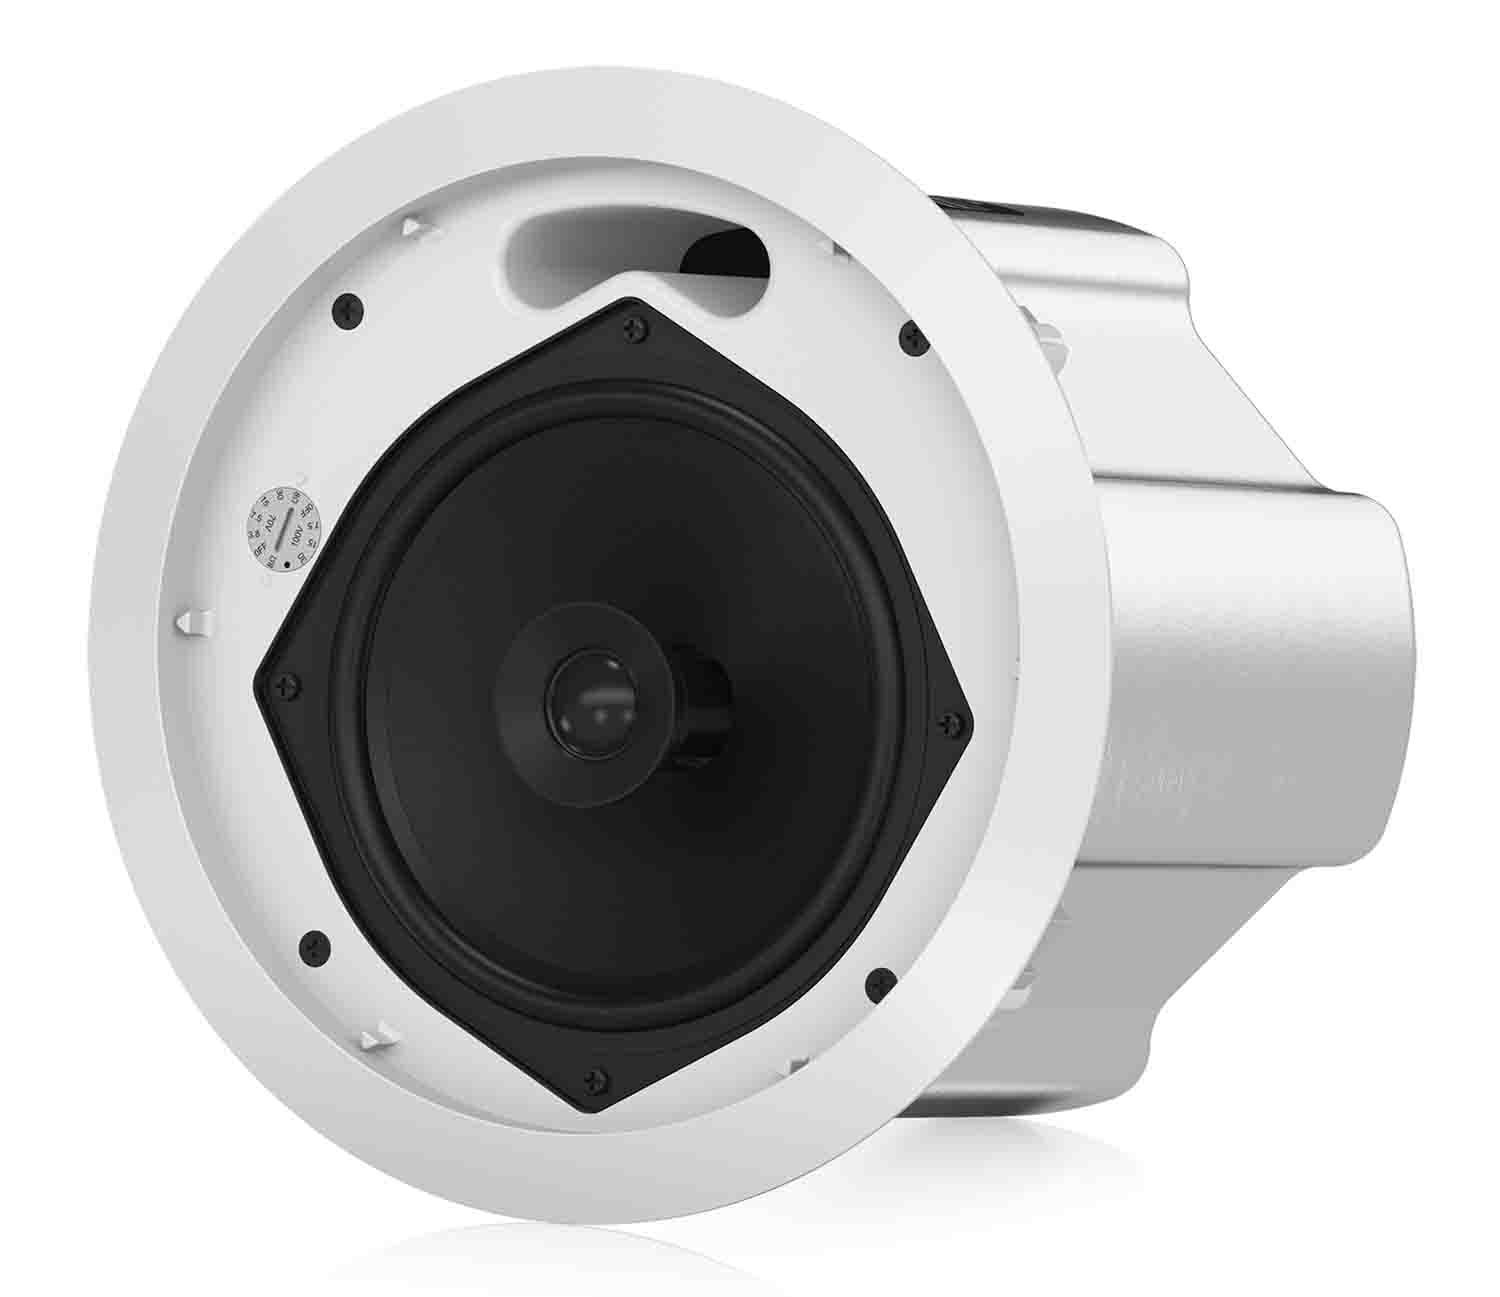 Tannoy CVS 601, 6.5-Inch Coaxial In-Ceiling Loudspeaker for Installation Applications - Hollywood DJ